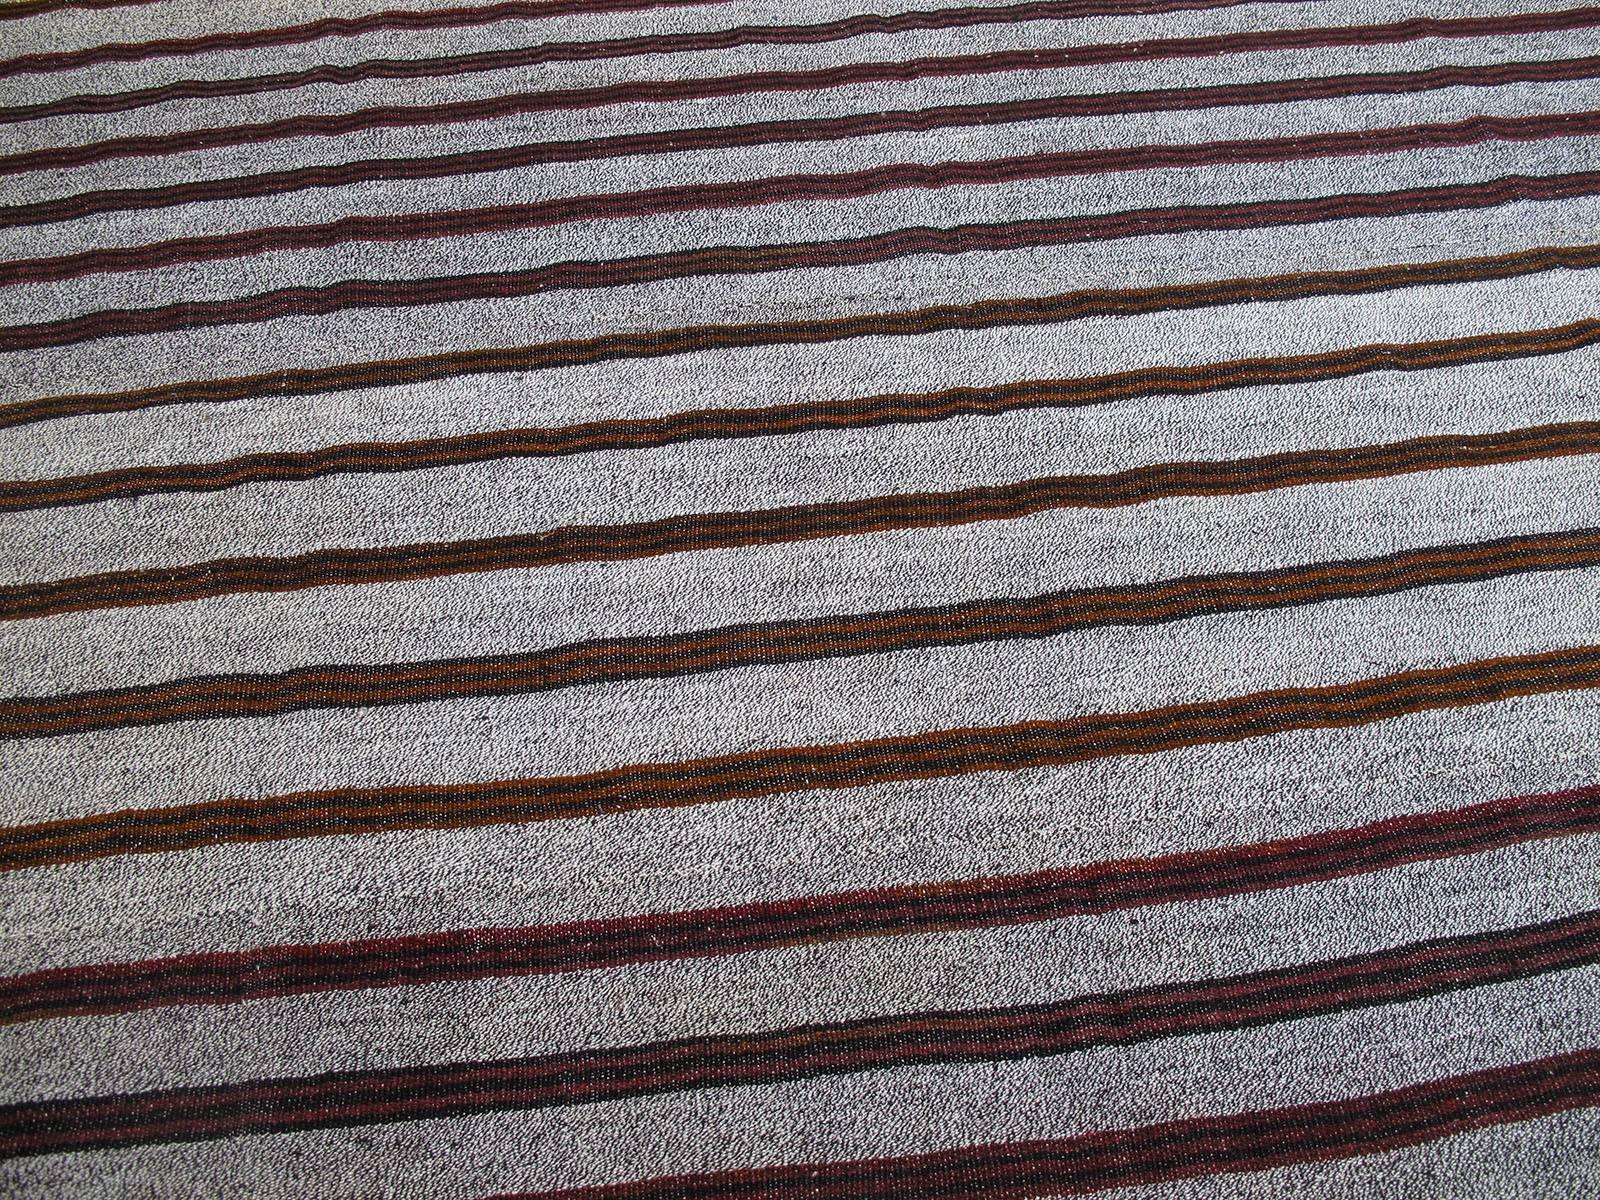 Hand-Woven Large Striped Kilim